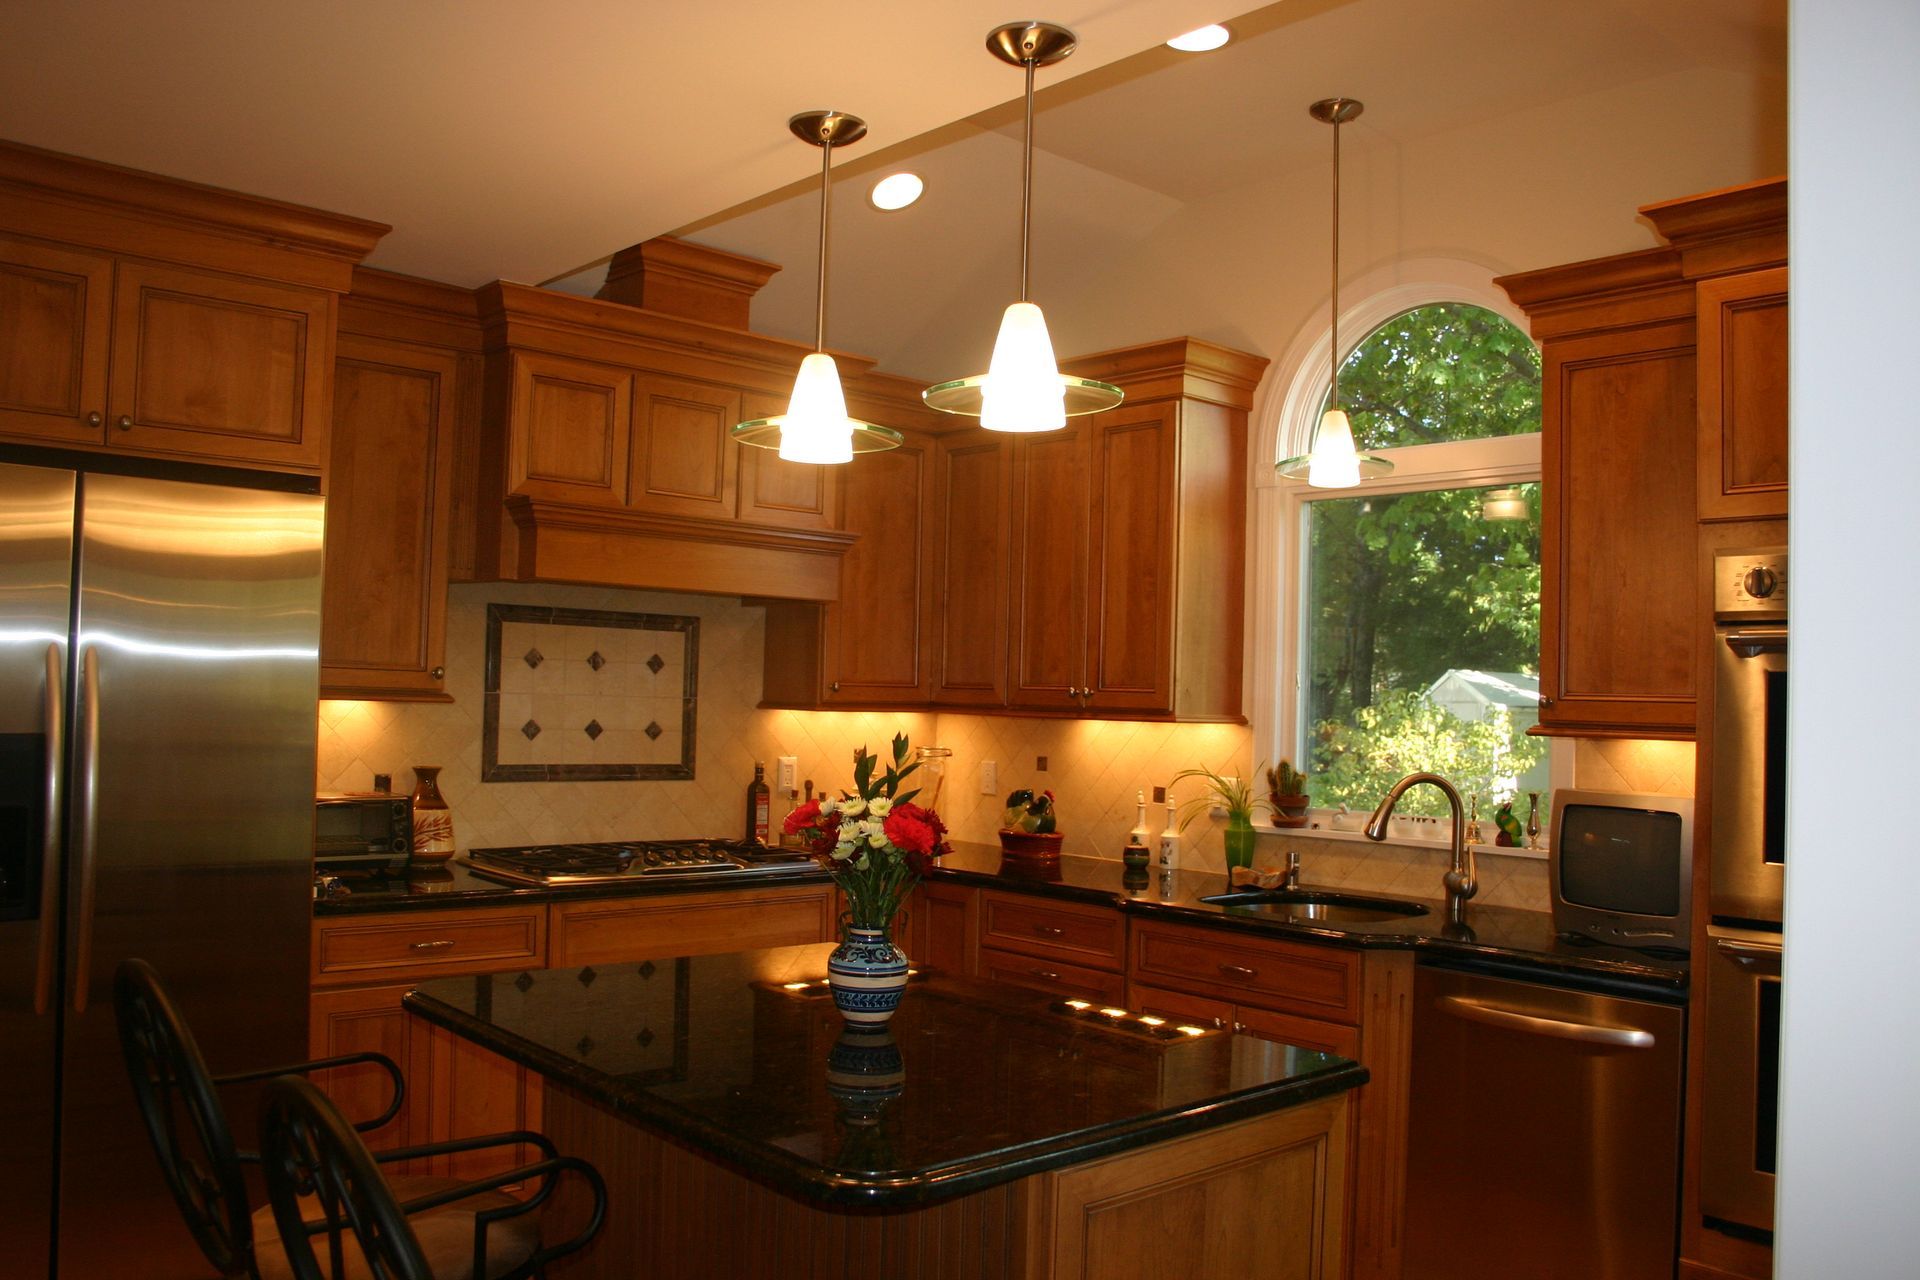 A kitchen with stainless steel appliances and wooden cabinets